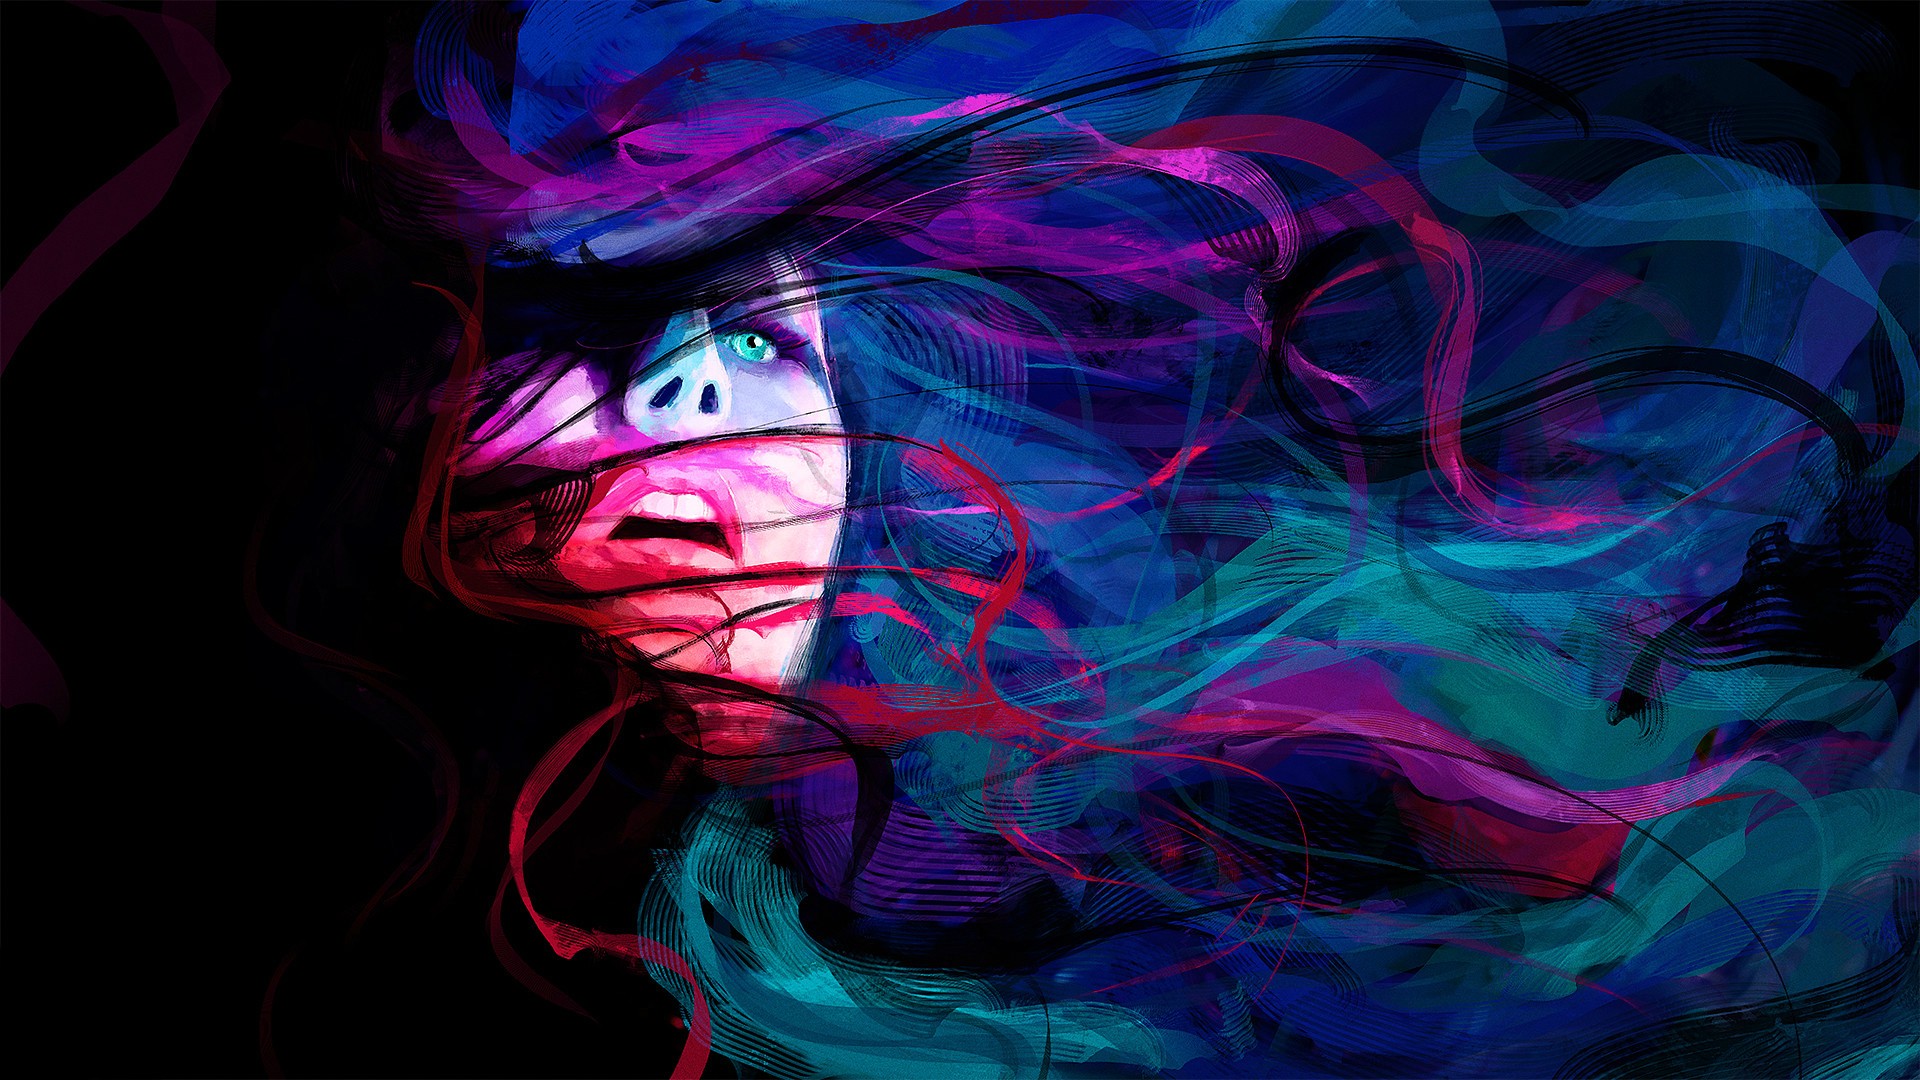 General 1920x1080 abstract digital art artwork red pink violet blue women open mouth blue eyes pink lipstick colorful face hair over one eye purple aqua eyes